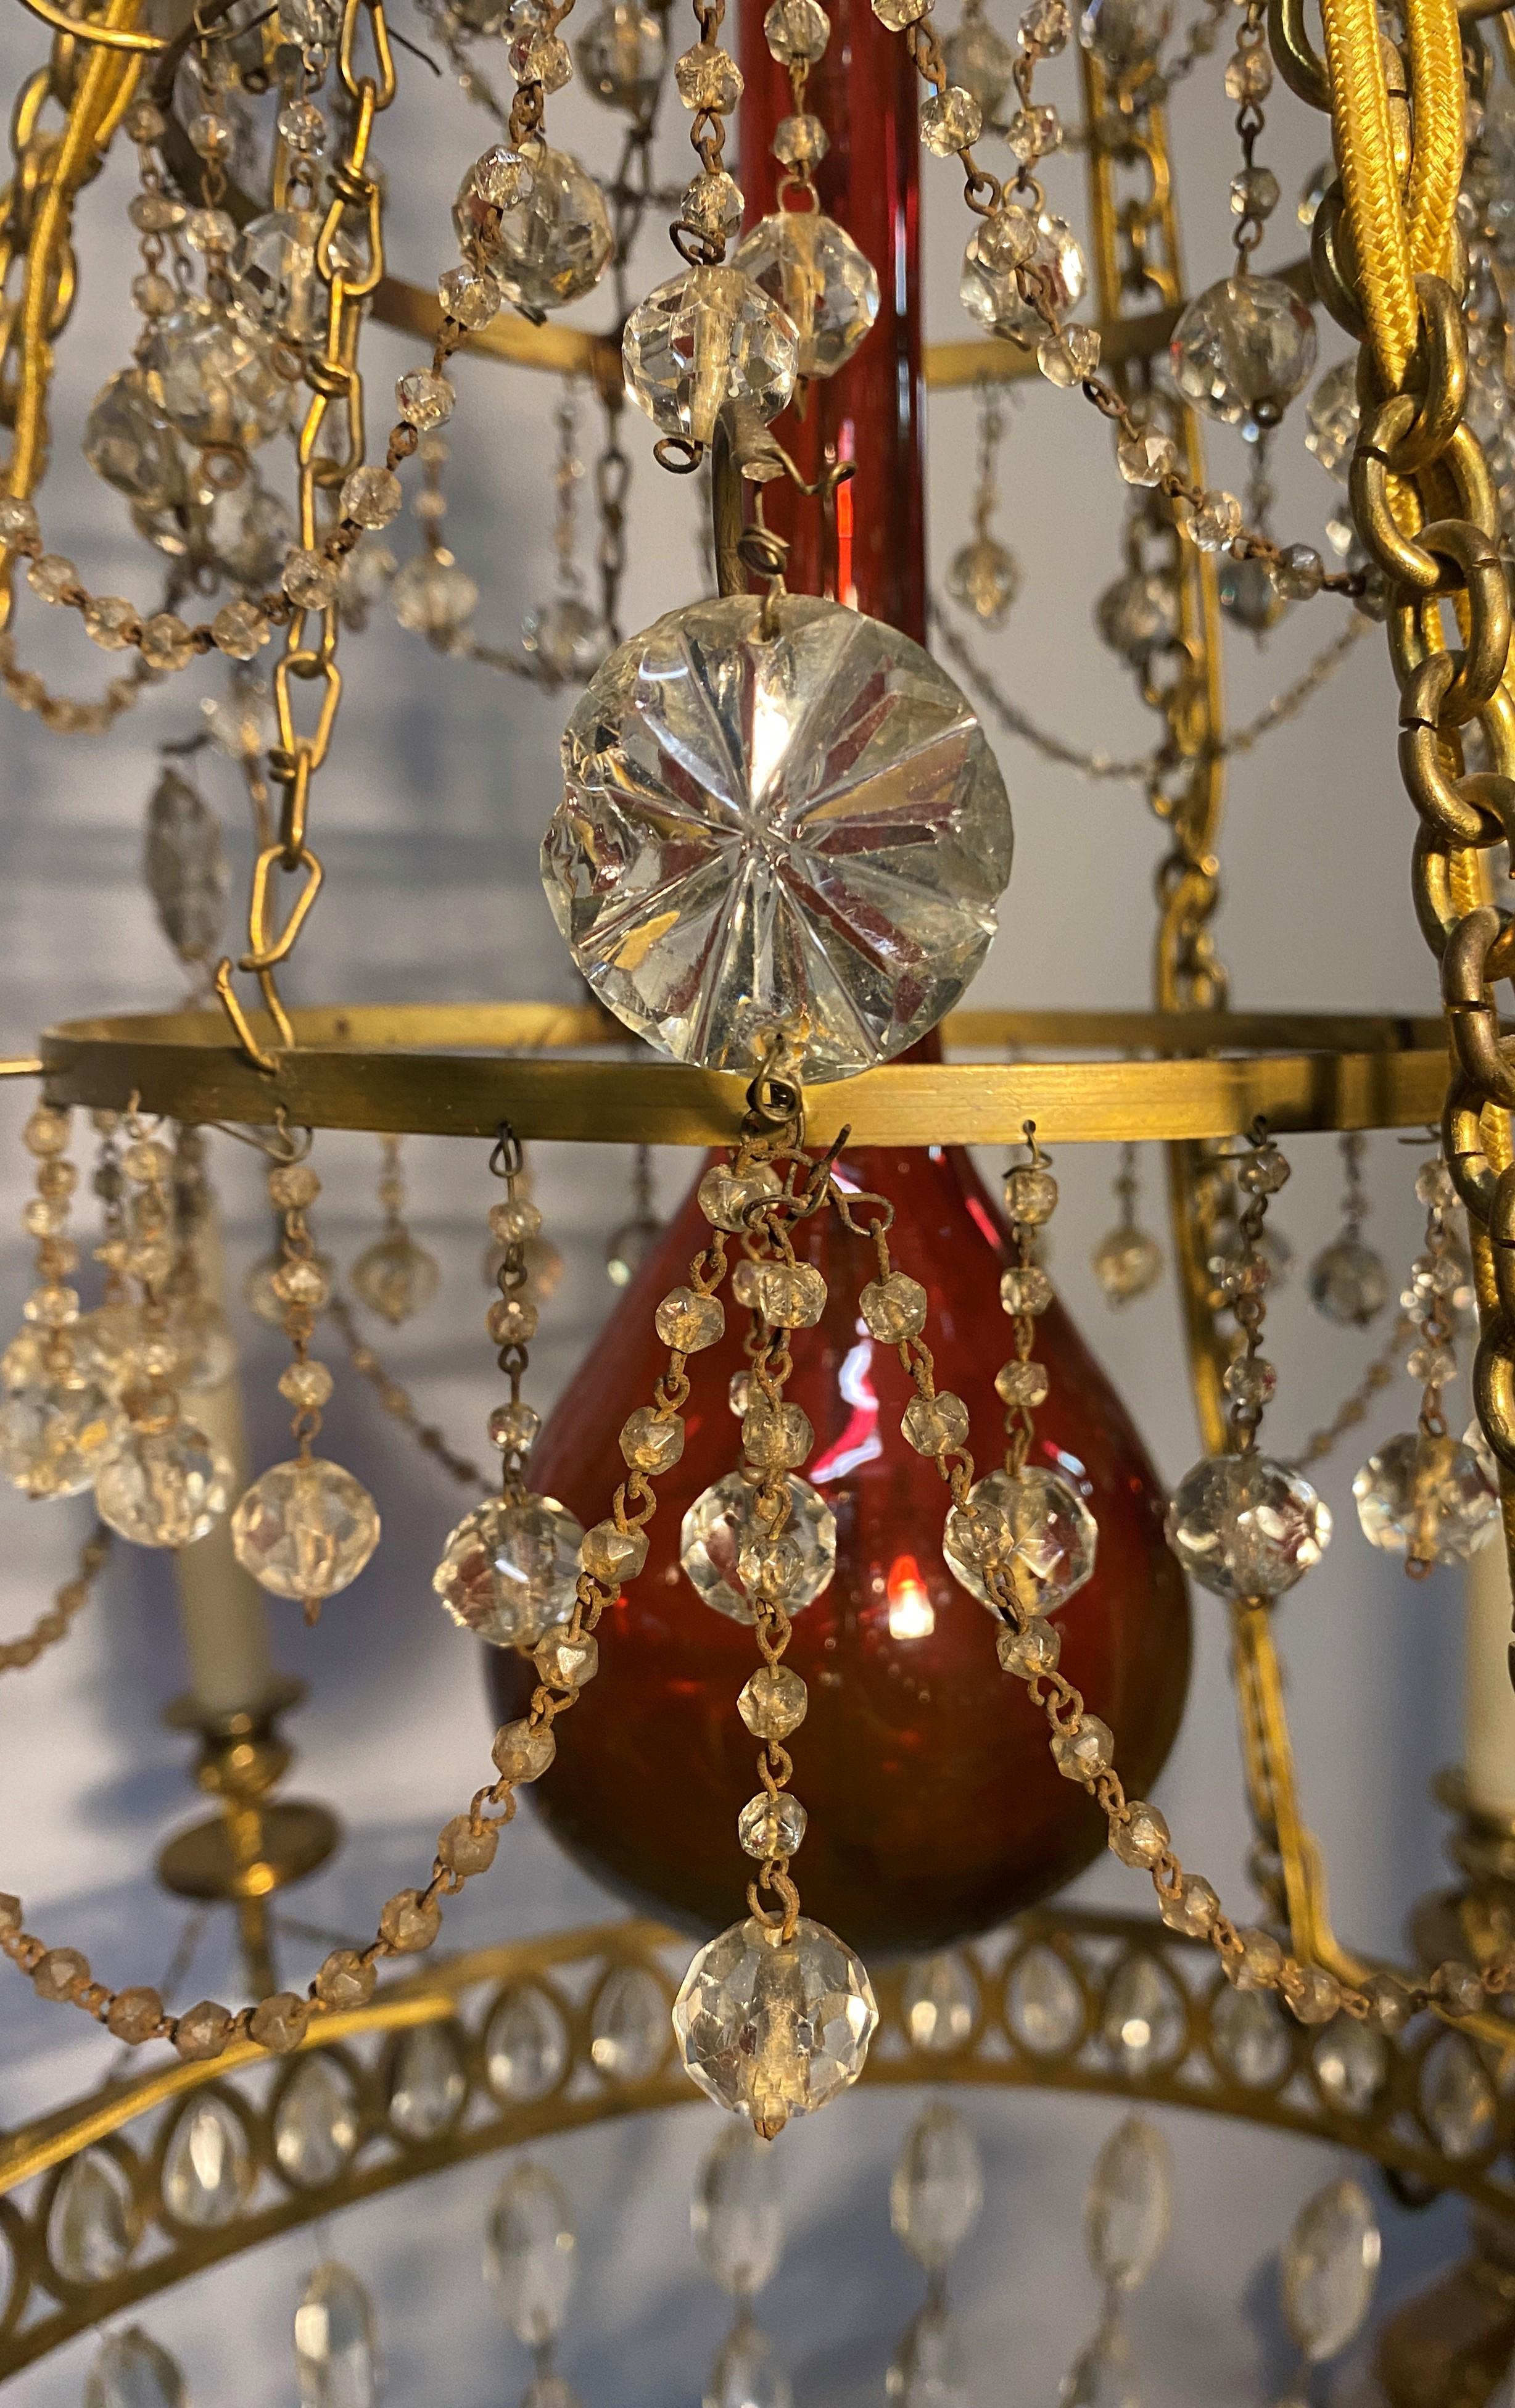 Magnificent Russian six lights chandelier dating from the end of the 18th century. The decorative elements of this chandelier are reminiscent of those that were made in St. Petersburg at the very end of the 18th century
The general shape, airy